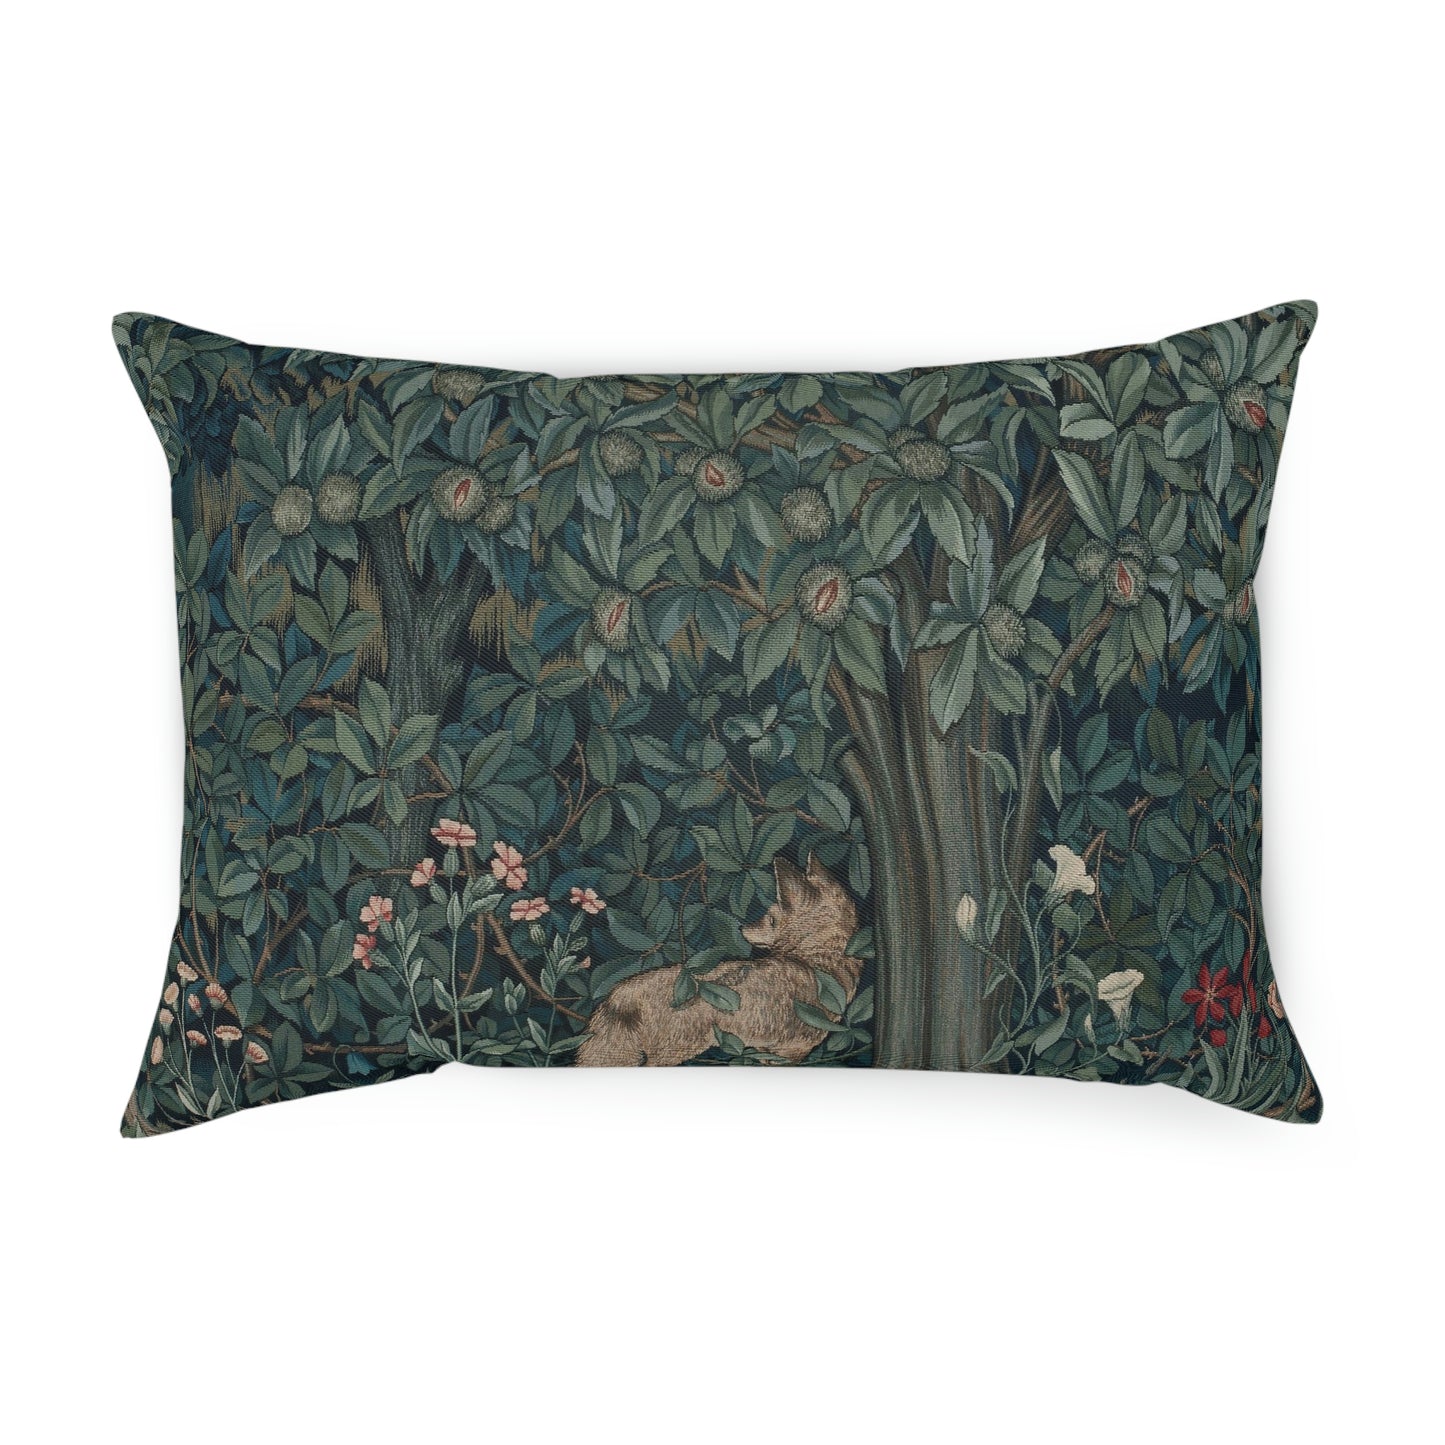 William-Morris-and-Co-Cushion-and-Cushion-Cover-Fox-by-John-Henry-Dearle-Green-Forest-Collection-11